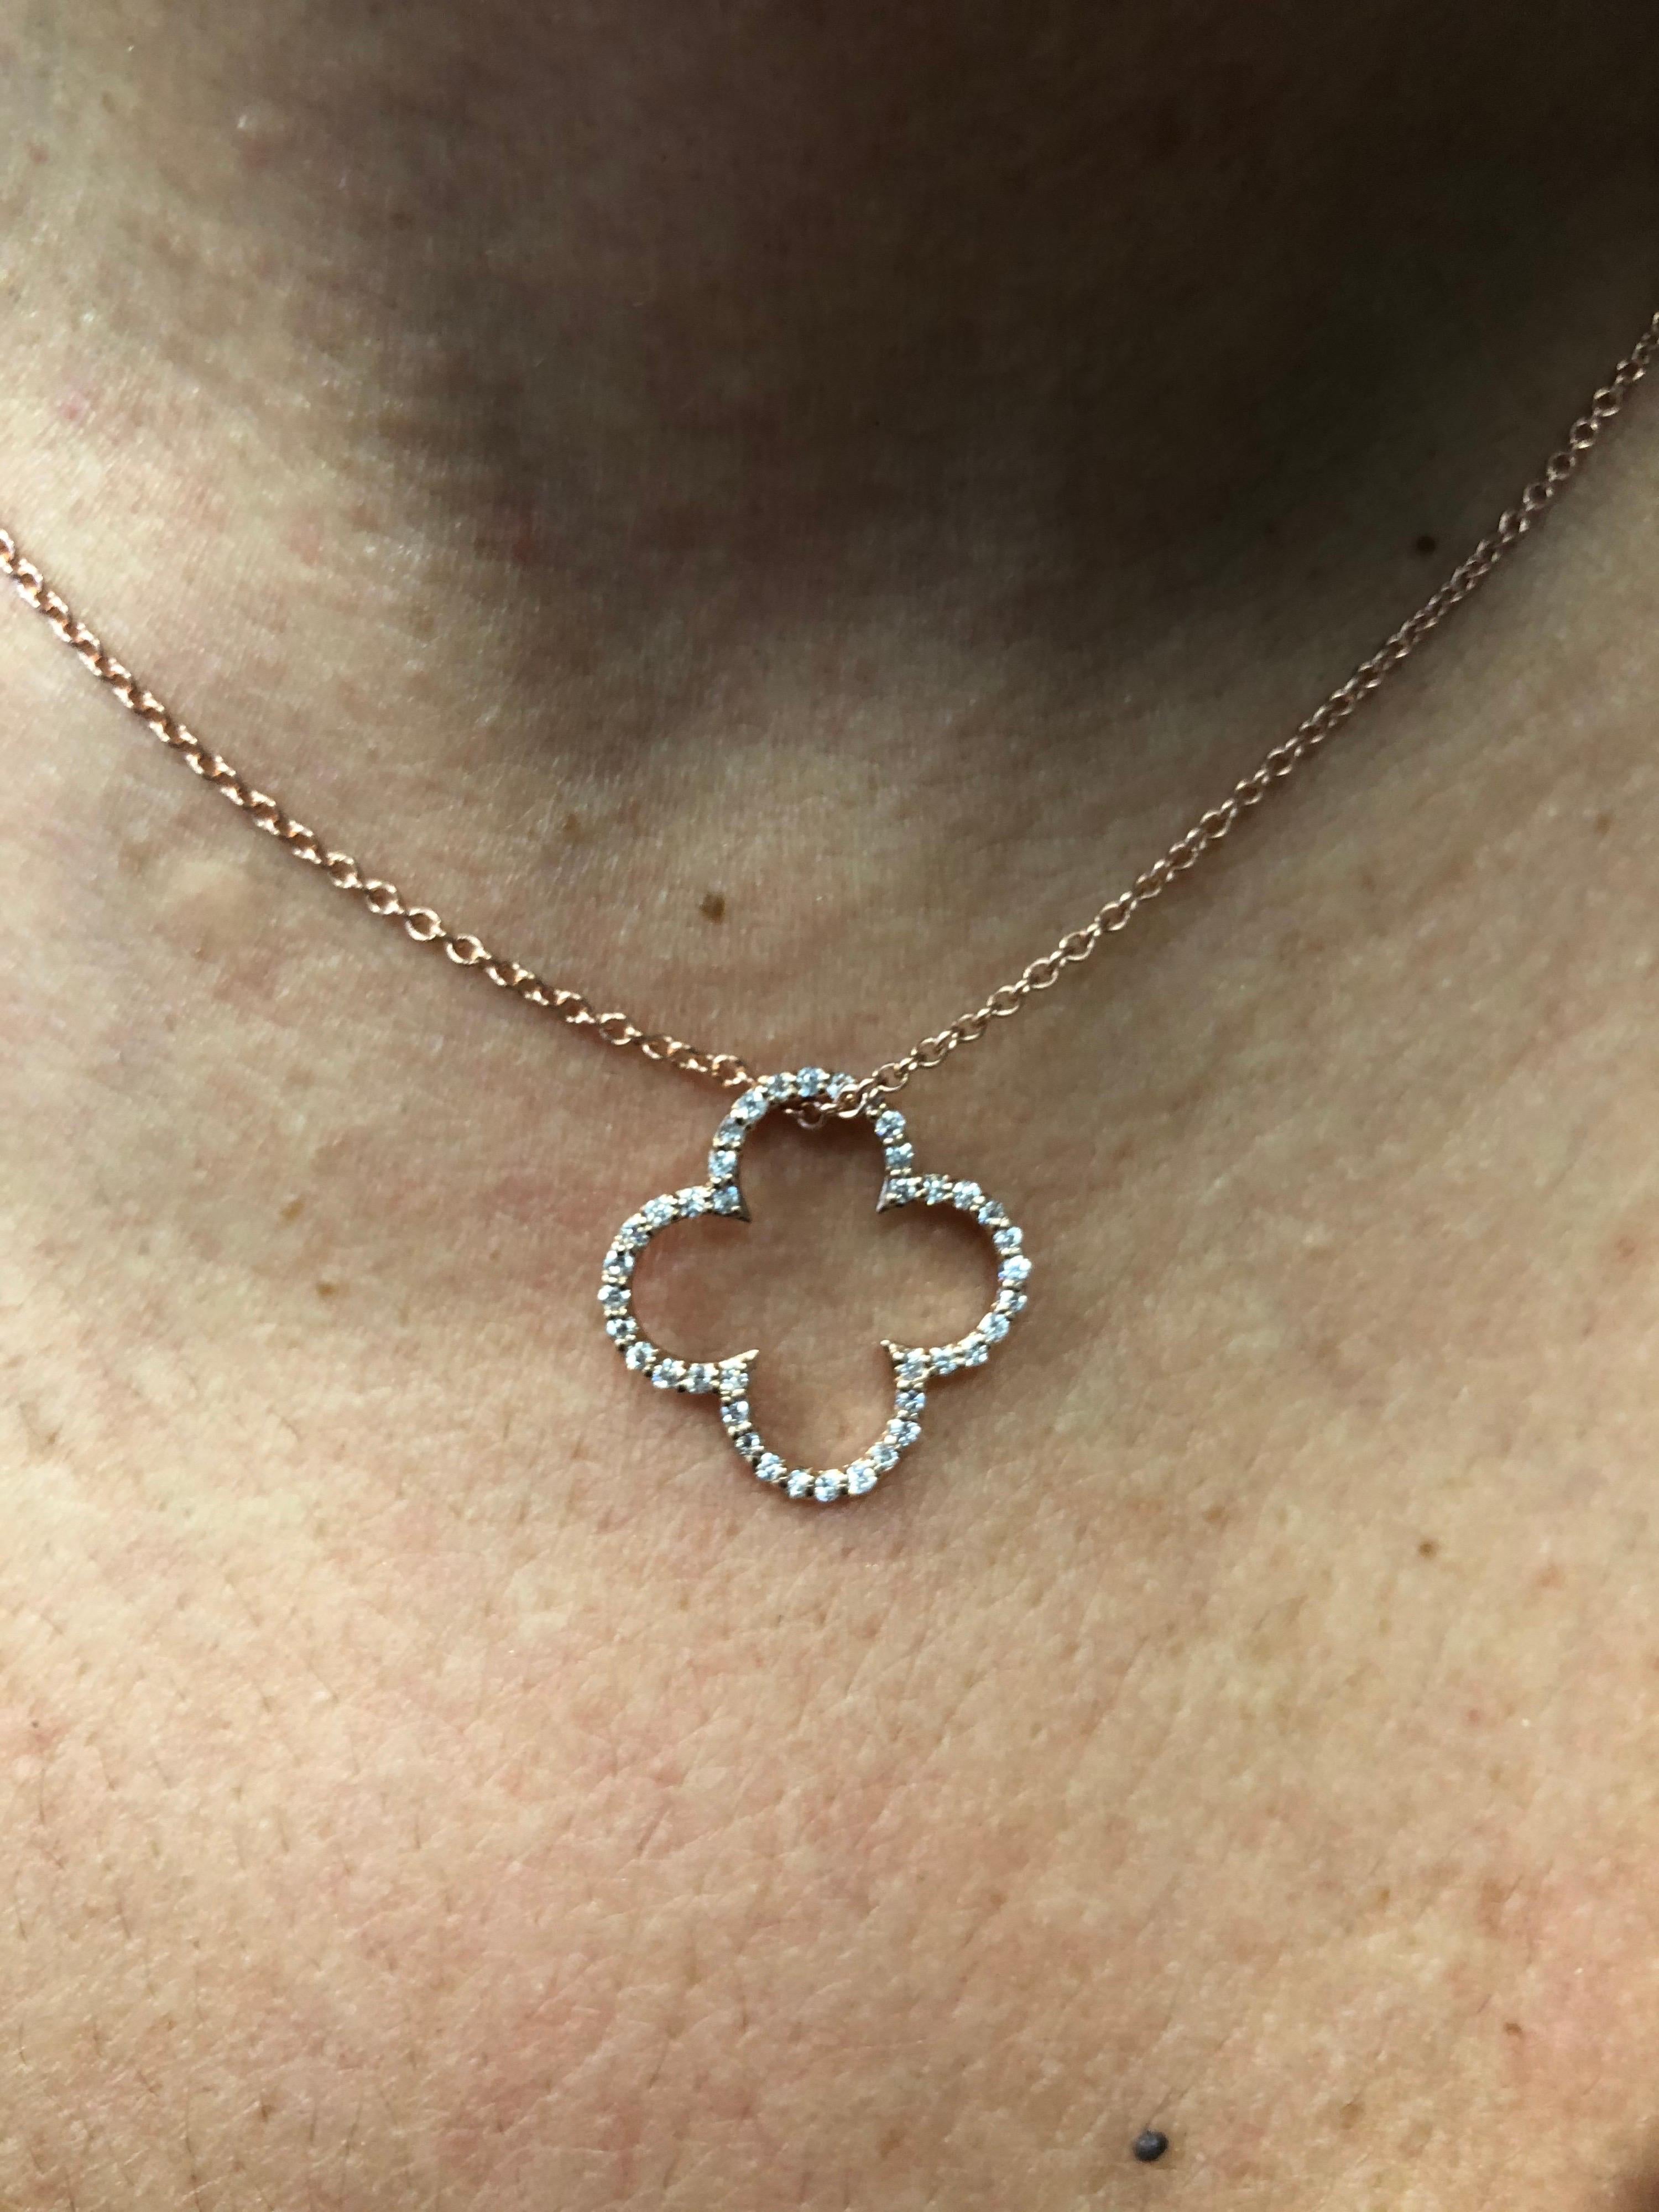 Diamond clover pendant set in 14K Rose gold. The pendant is set with 40 stones each weighing 0.01 carats making the total carat weight 0.40. The color of the stones are H, the clarity is SI1-SI2. The pendant is available in both yellow and white